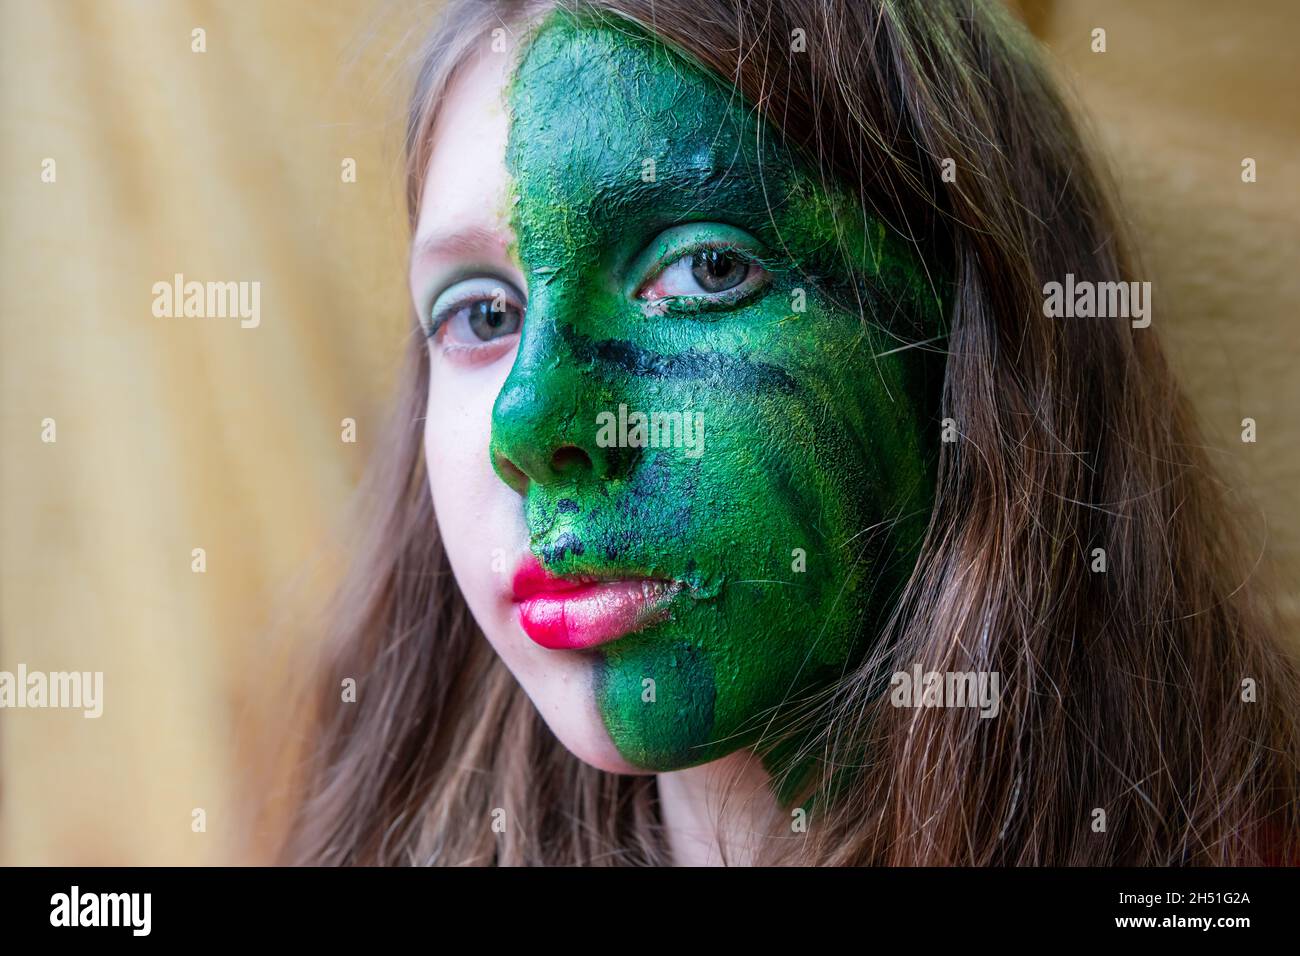 Teenage girl activist with half green make-up or face paint for a climate protest, concept of environmental concern, going green Stock Photo